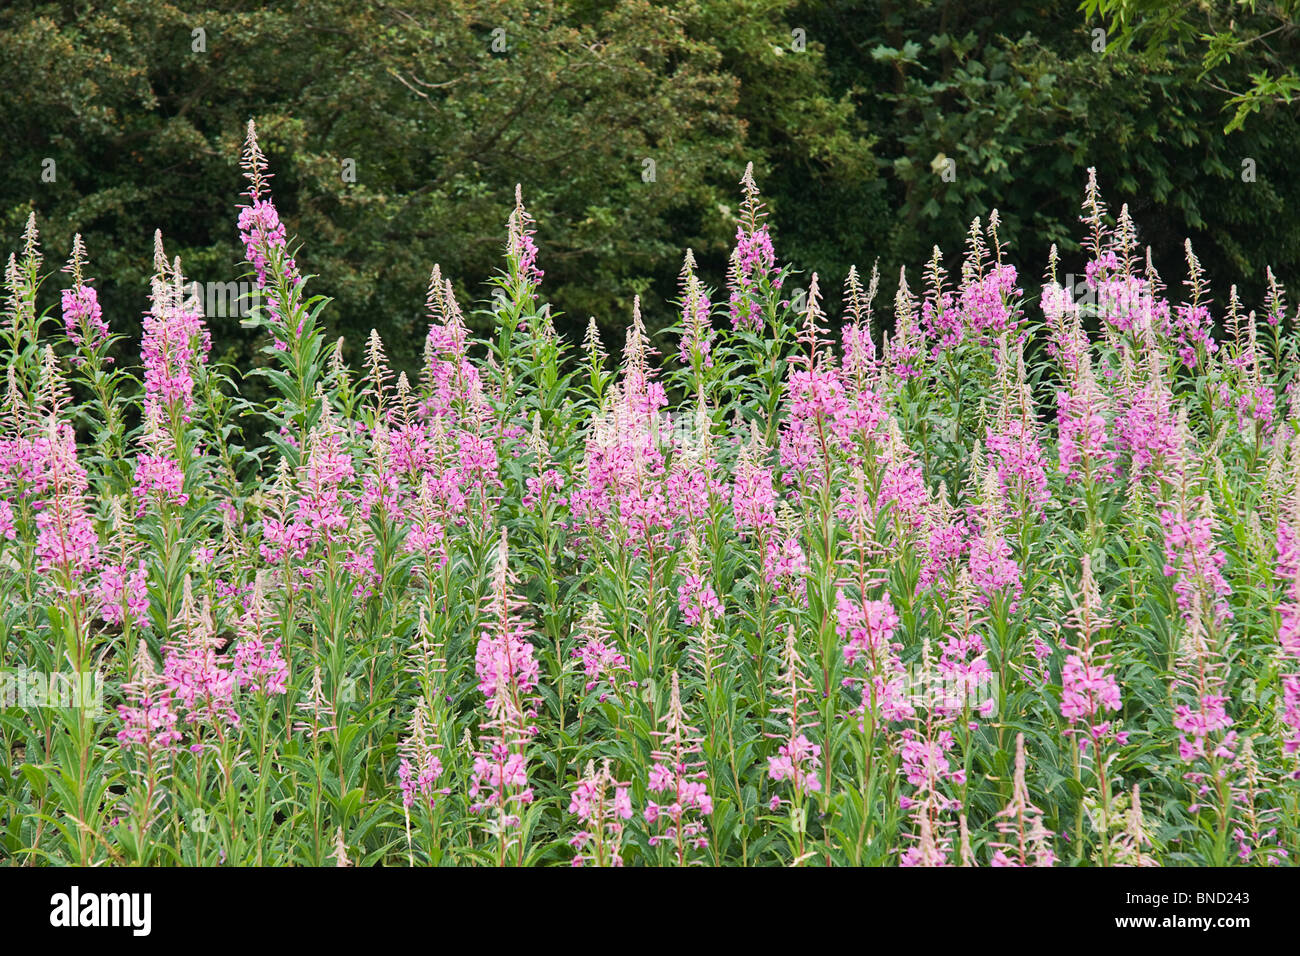 A bank of Rose-bay Willow Herb (Epilobium angustilalium) flowers growing on a grass verge in Melmerby, North Yorkshire Stock Photo